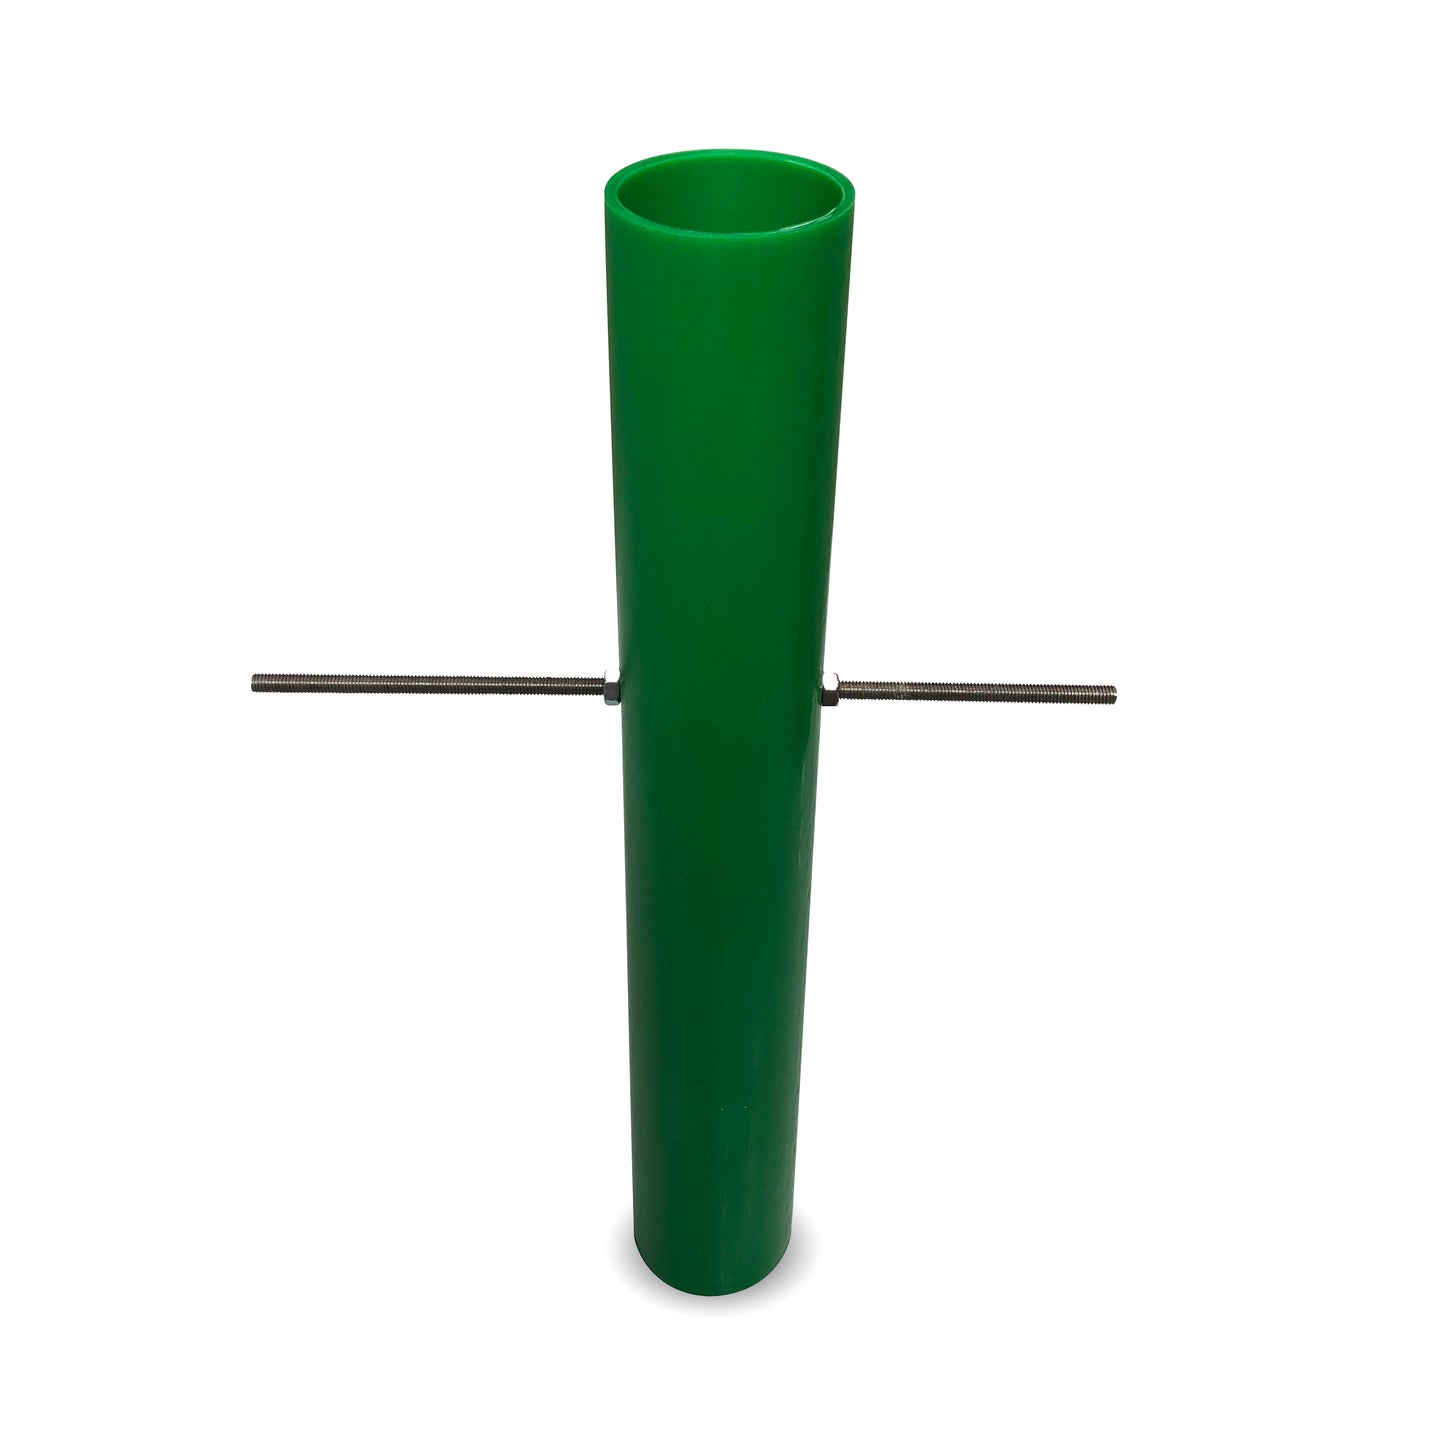 Foundation Pipe, for Bit Fat, green plastic